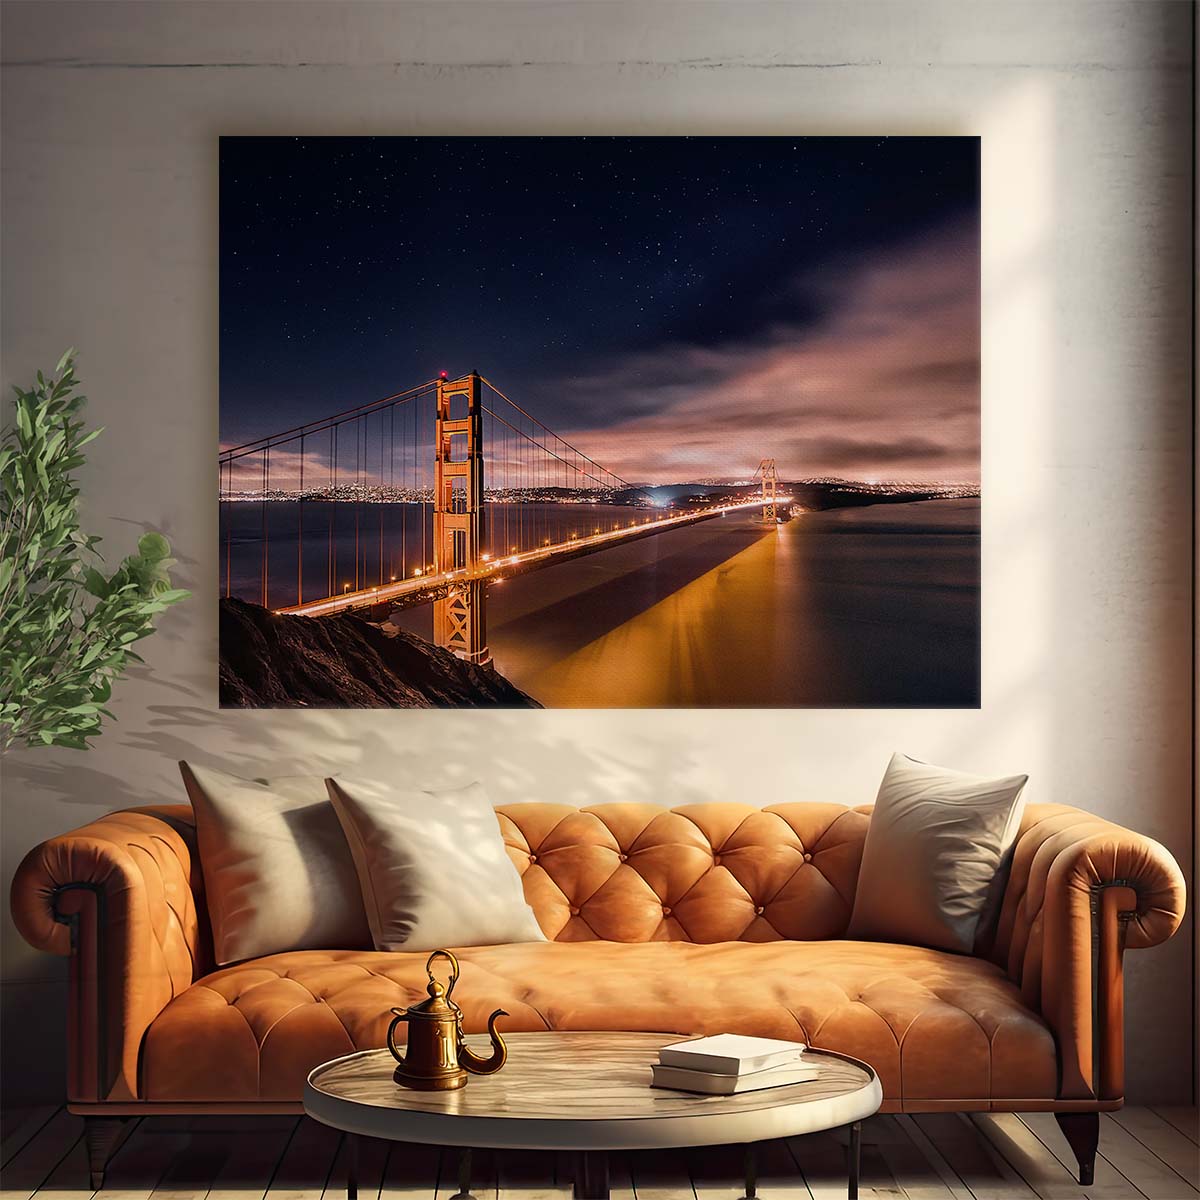 Iconic Golden Gate Bridge San Francisco Night Wall Art by Luxuriance Designs. Made in USA.